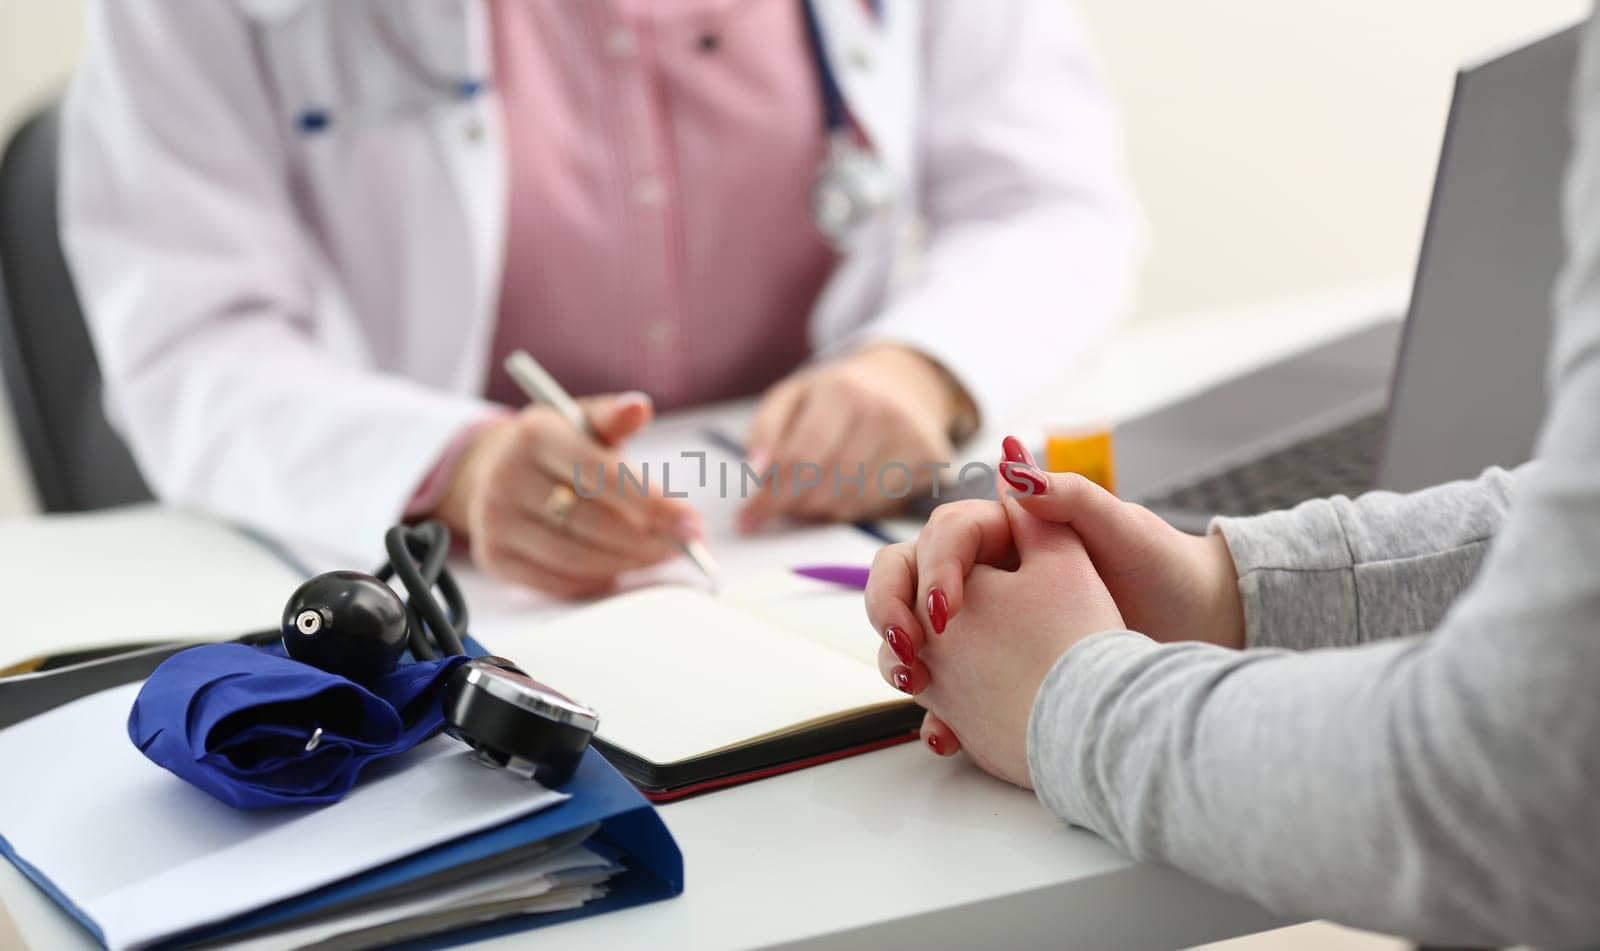 Female doctor hand hold silver pen filling patient history list at clipboard pad. Physical exam er disease prevention ward round visit check 911 prescribe remedy healthy lifestyle concept